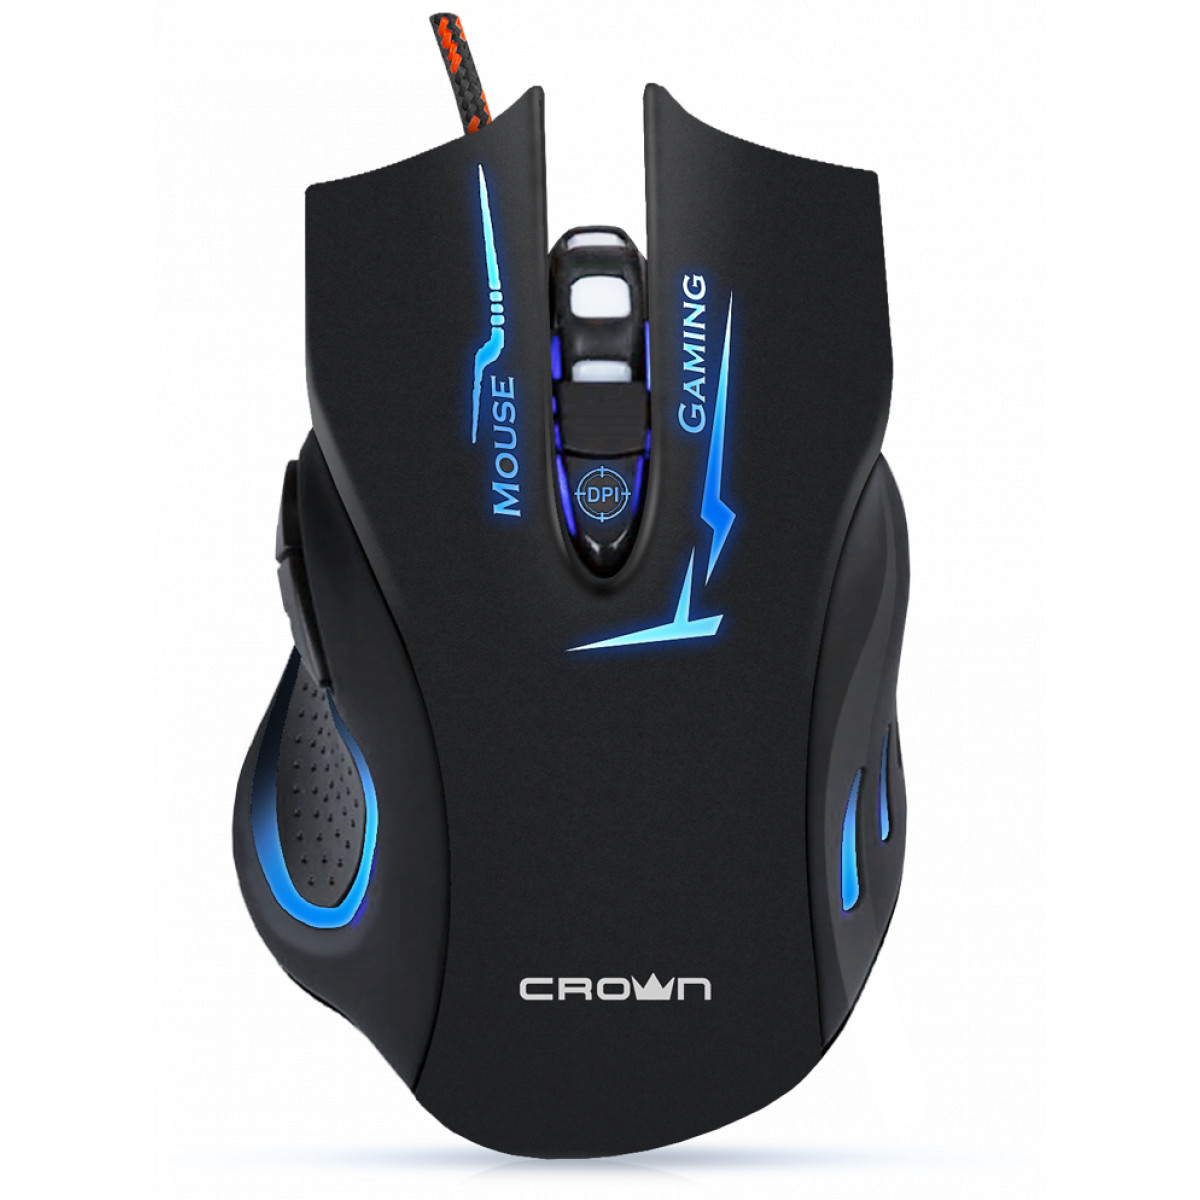 MOUSE CROWN GAMING CMXG-615 GALAXY USB 2400DPI ,Mouse